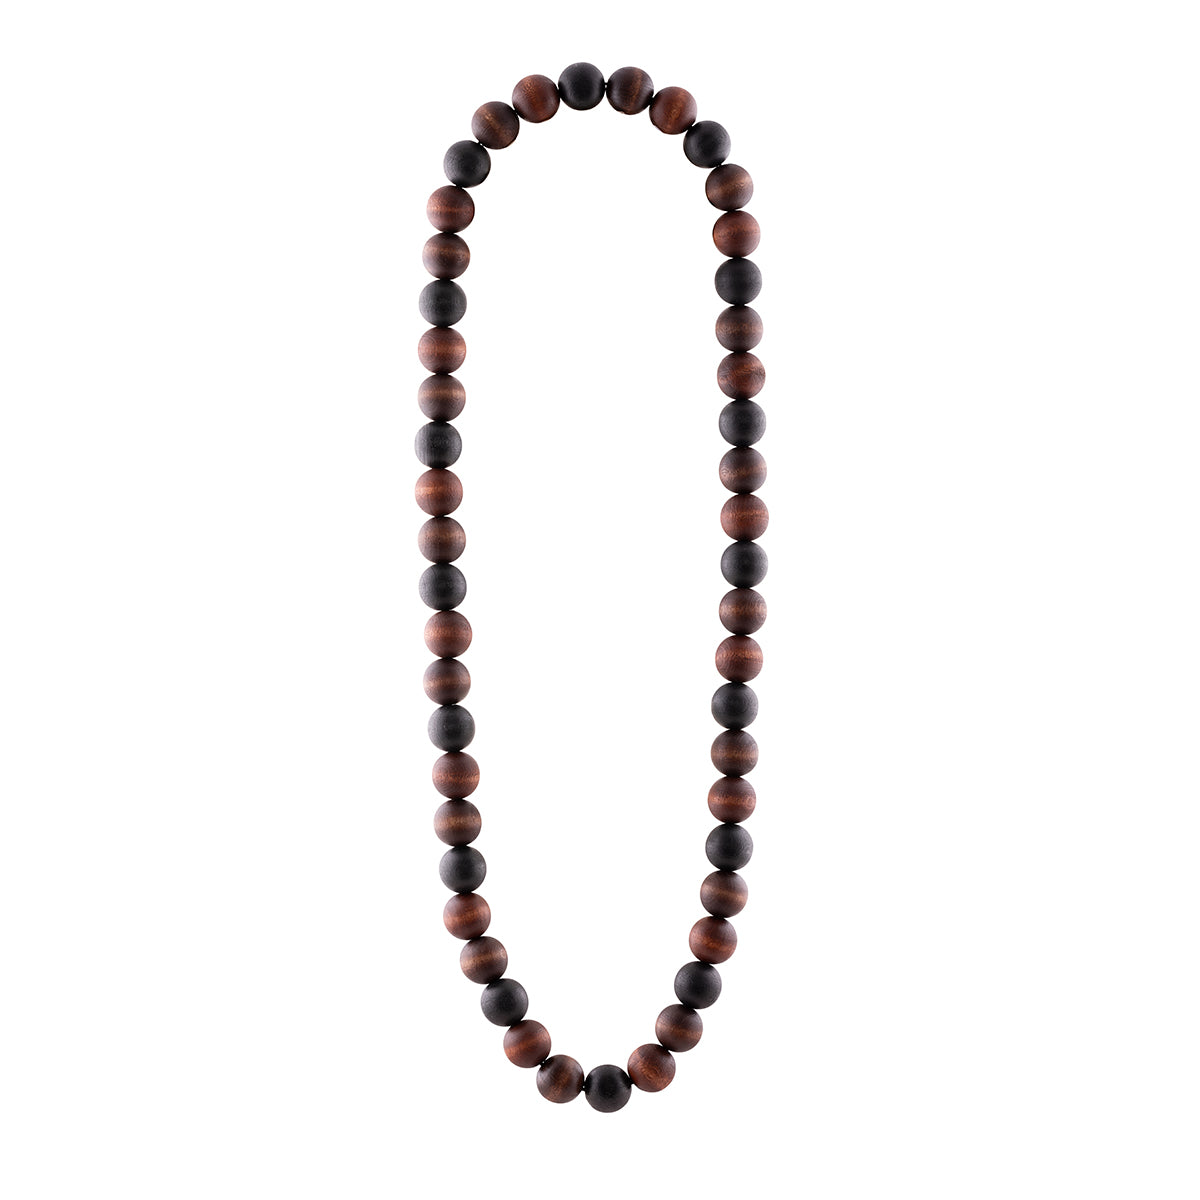 Suometar necklace, black and brown